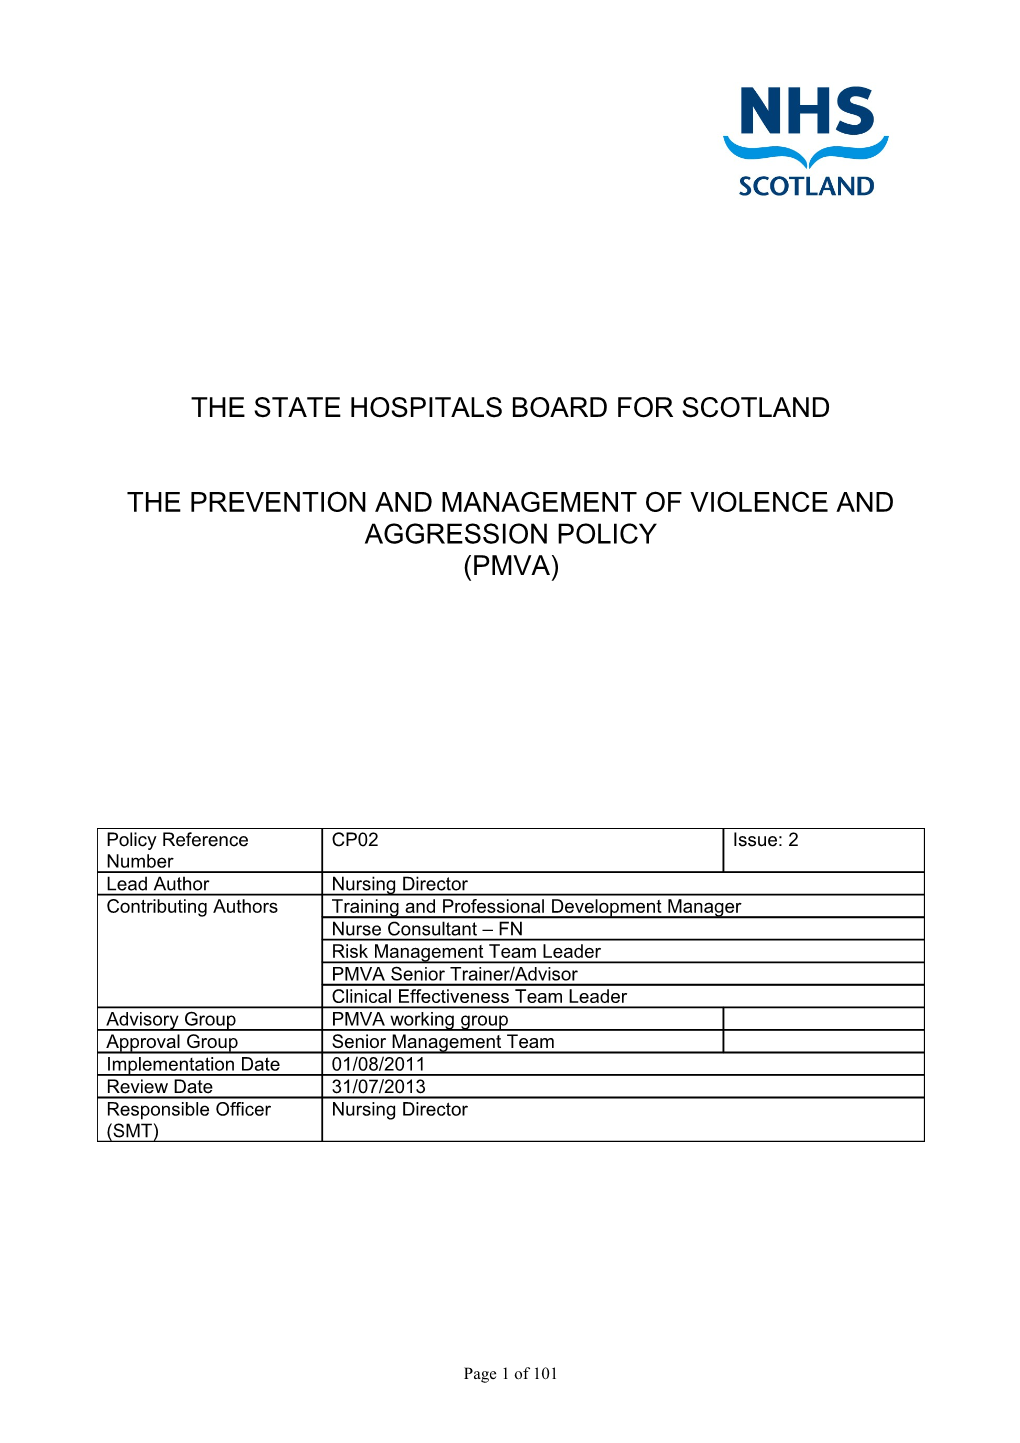 The State Hospitals Board for Scotland